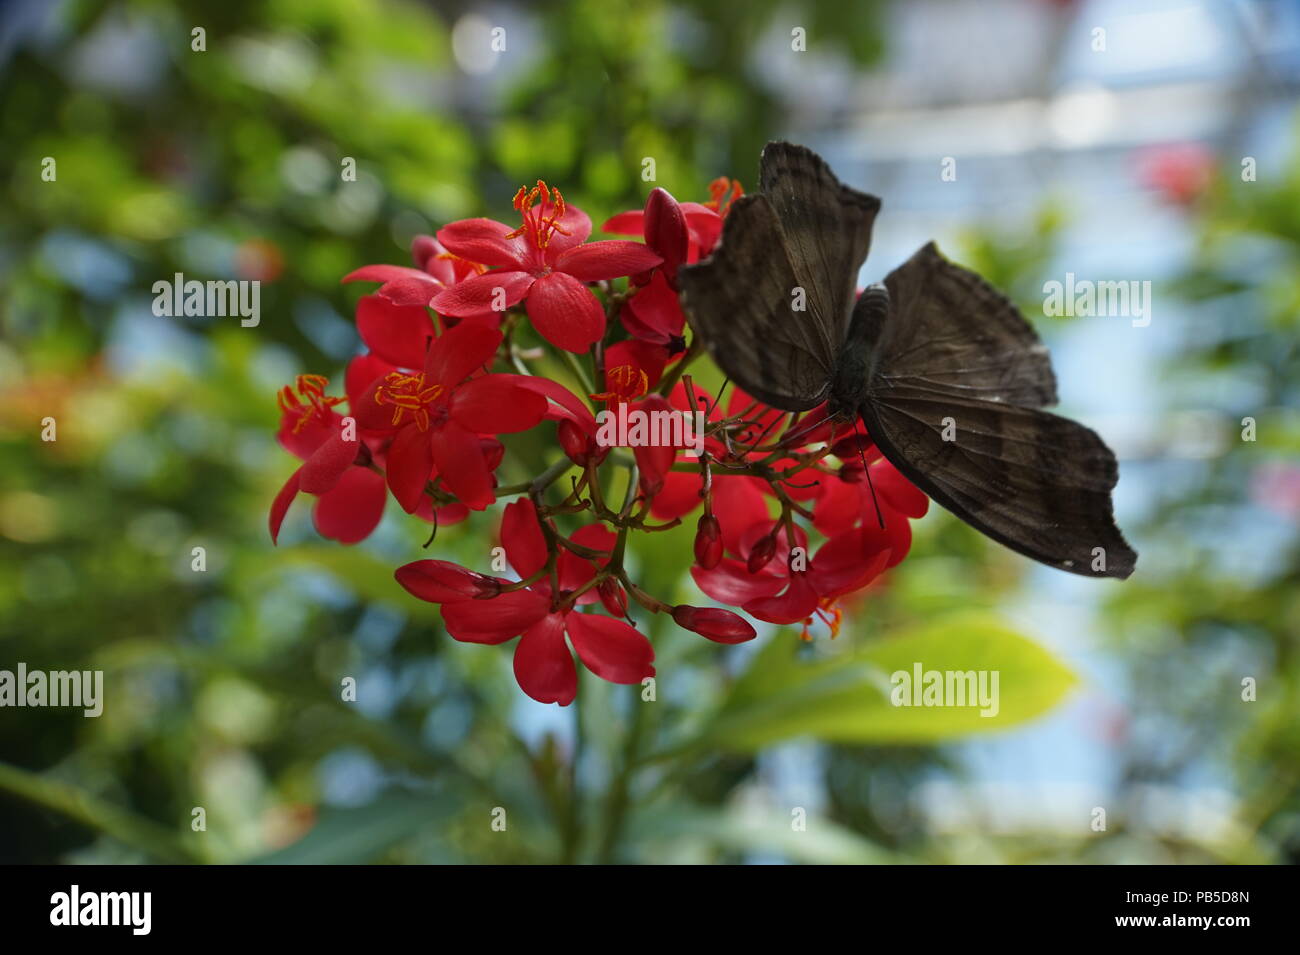 Butterfly on red flowers. Calgary Zoo Garden, Enmax Conservatory, Calgary, Alberta Canada Stock Photo